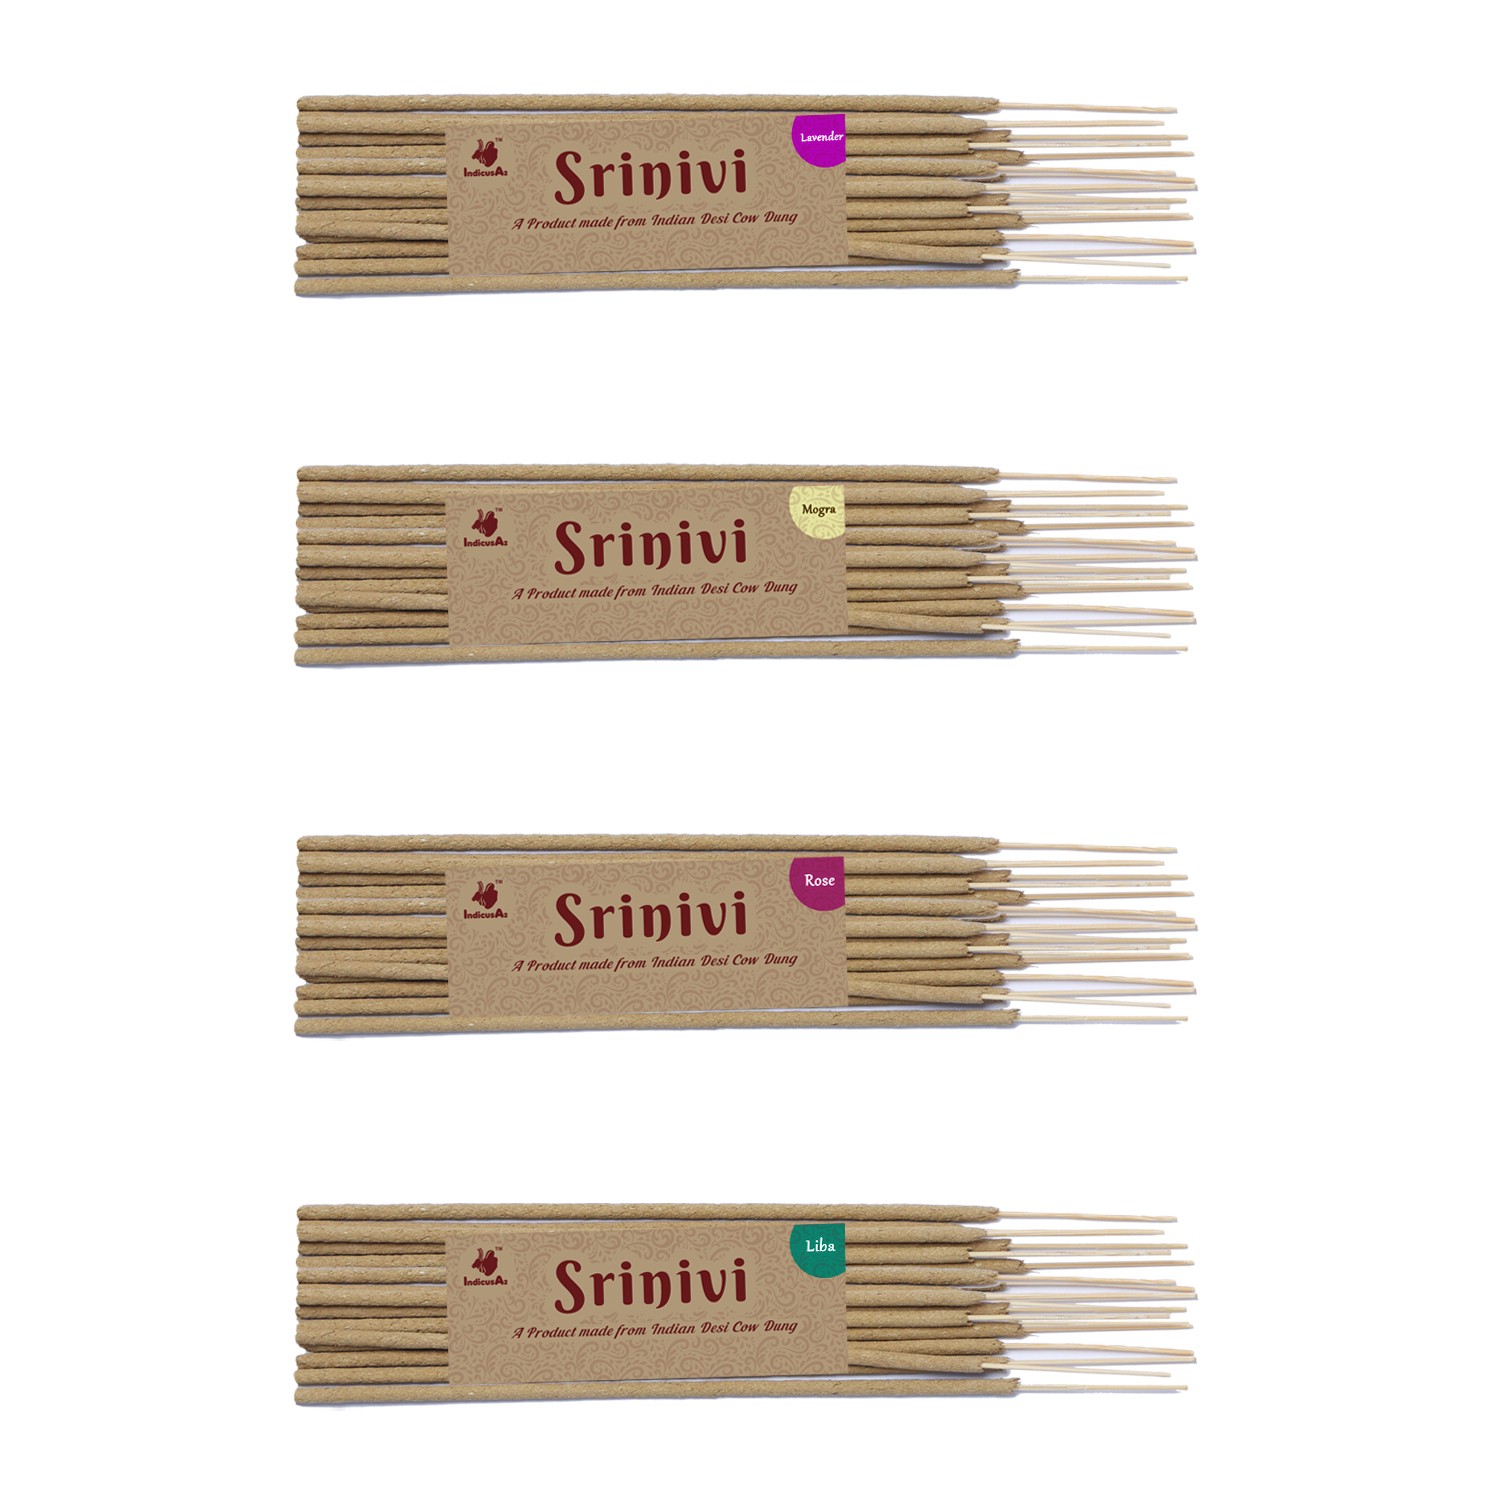 Srinivi Agarbattis - Made up of desi cow dung|Pack of 4|Each pack consists of 18 sticks|Fragrance - Lavender, Mogra, Rose, Thulasi.